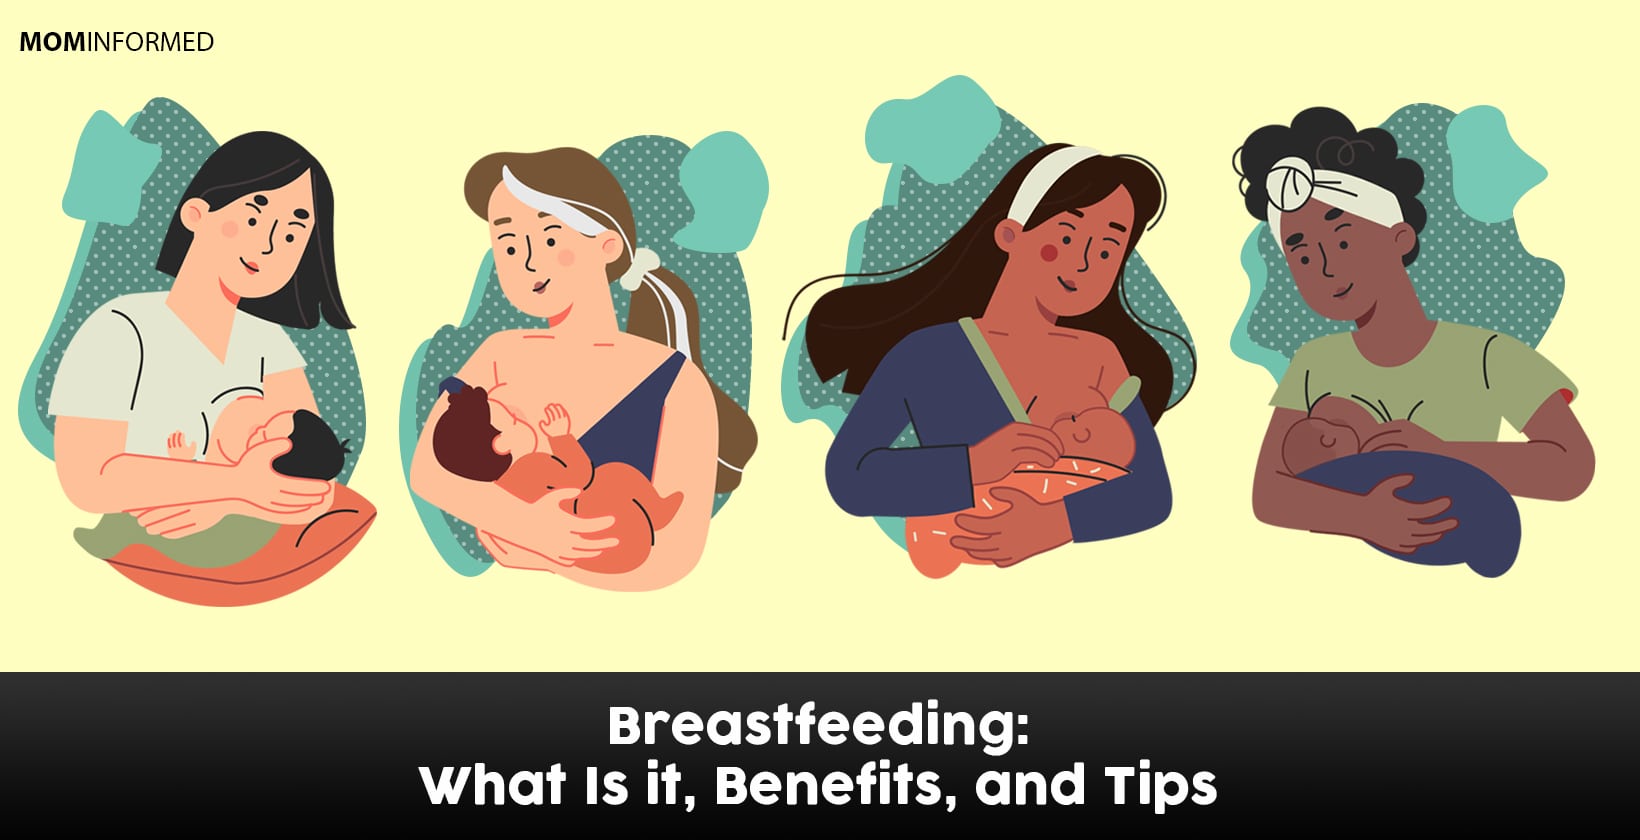 Breastfeeding information, benefits, and how to do it